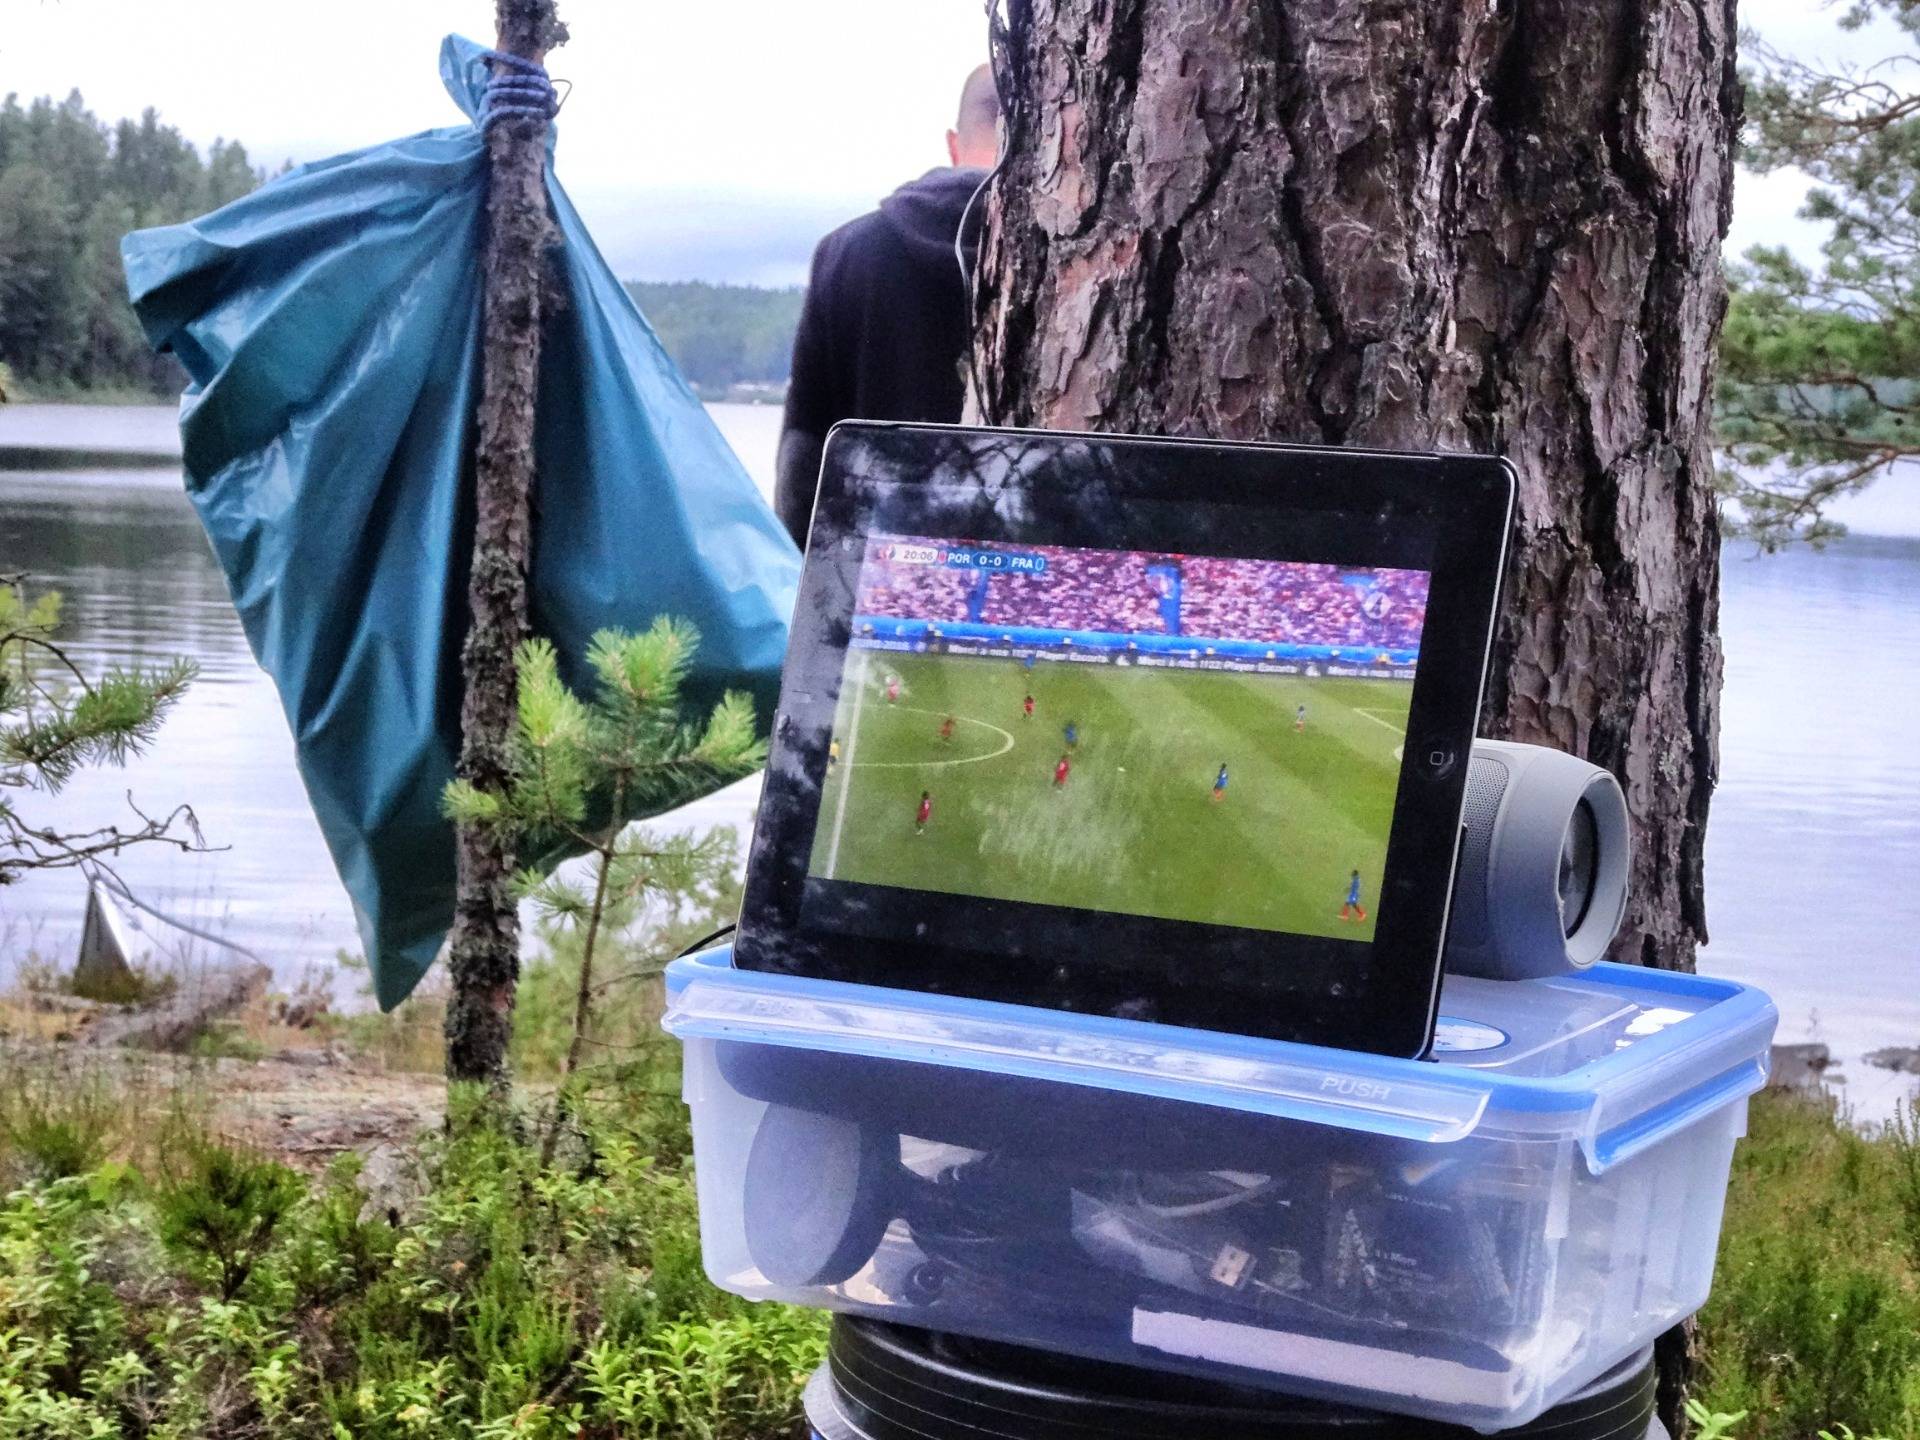 And in Poland you can watch football everywhere outside with a 4G connection